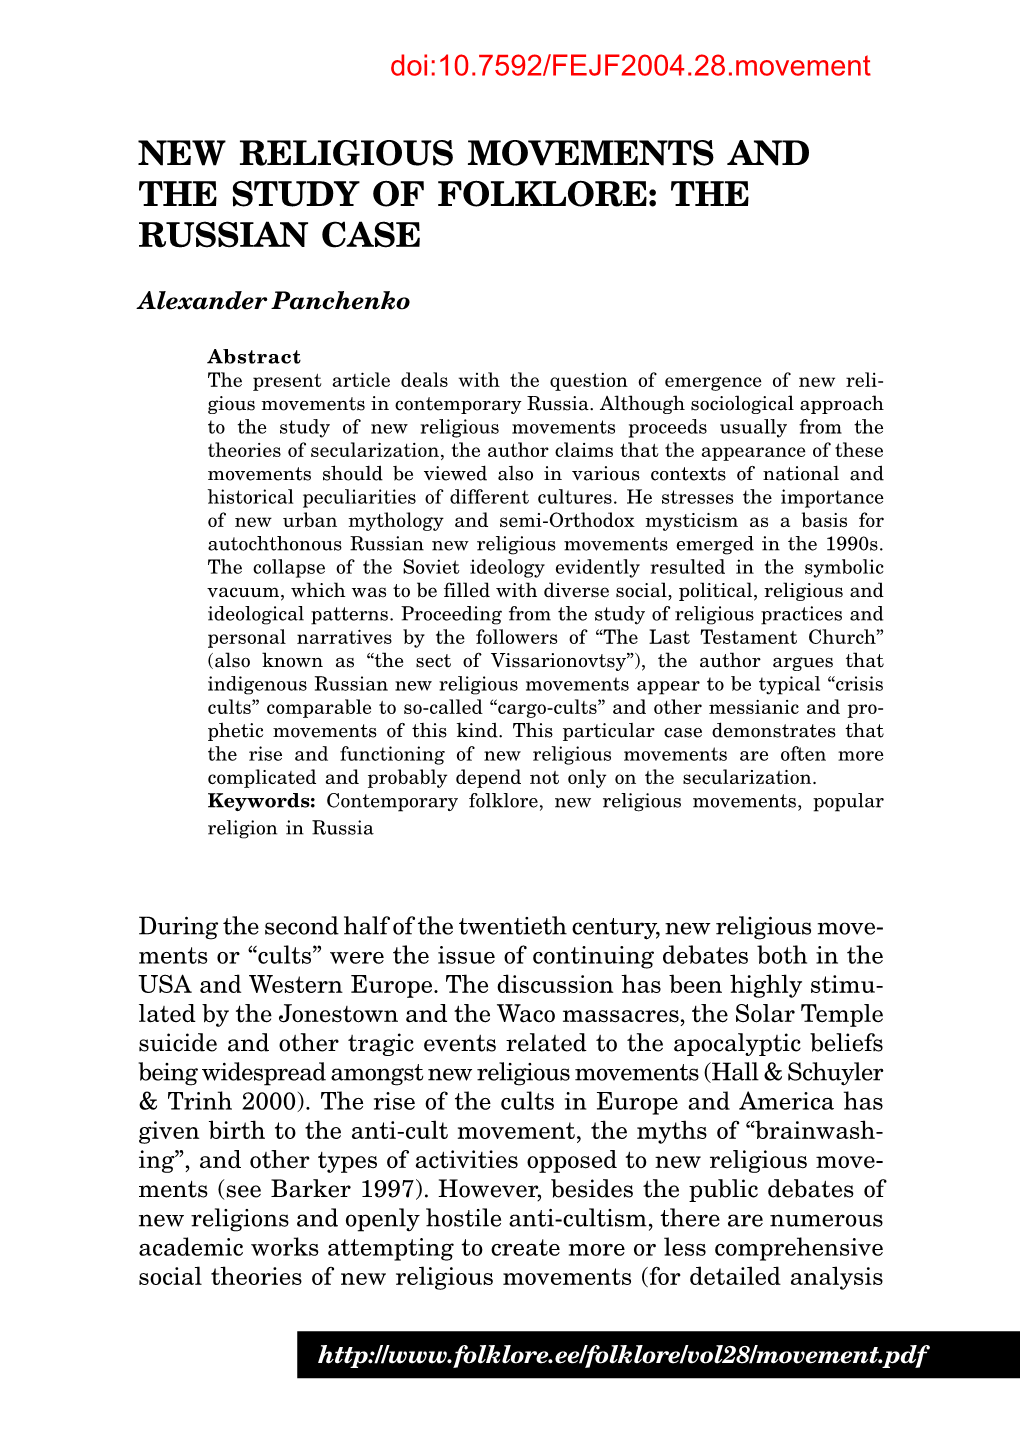 New Religious Movements and the Study of Folklore: the Russian Case